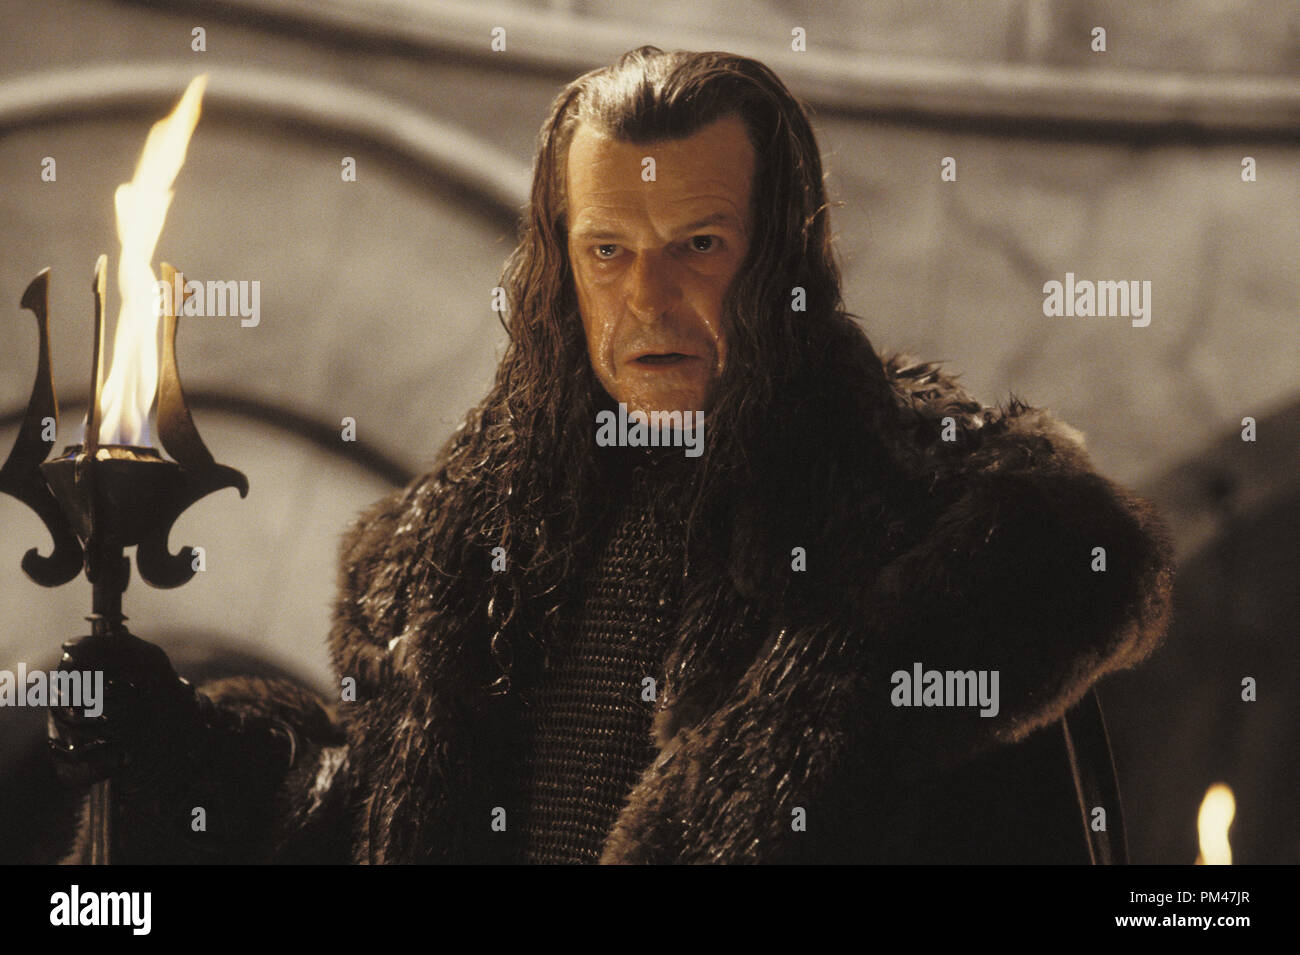 Newline Pictures Presents "Lord of the Rings: The Return of the King" John  Noble © 2003 New Line Photo by Pierre Vinet Stock Photo - Alamy